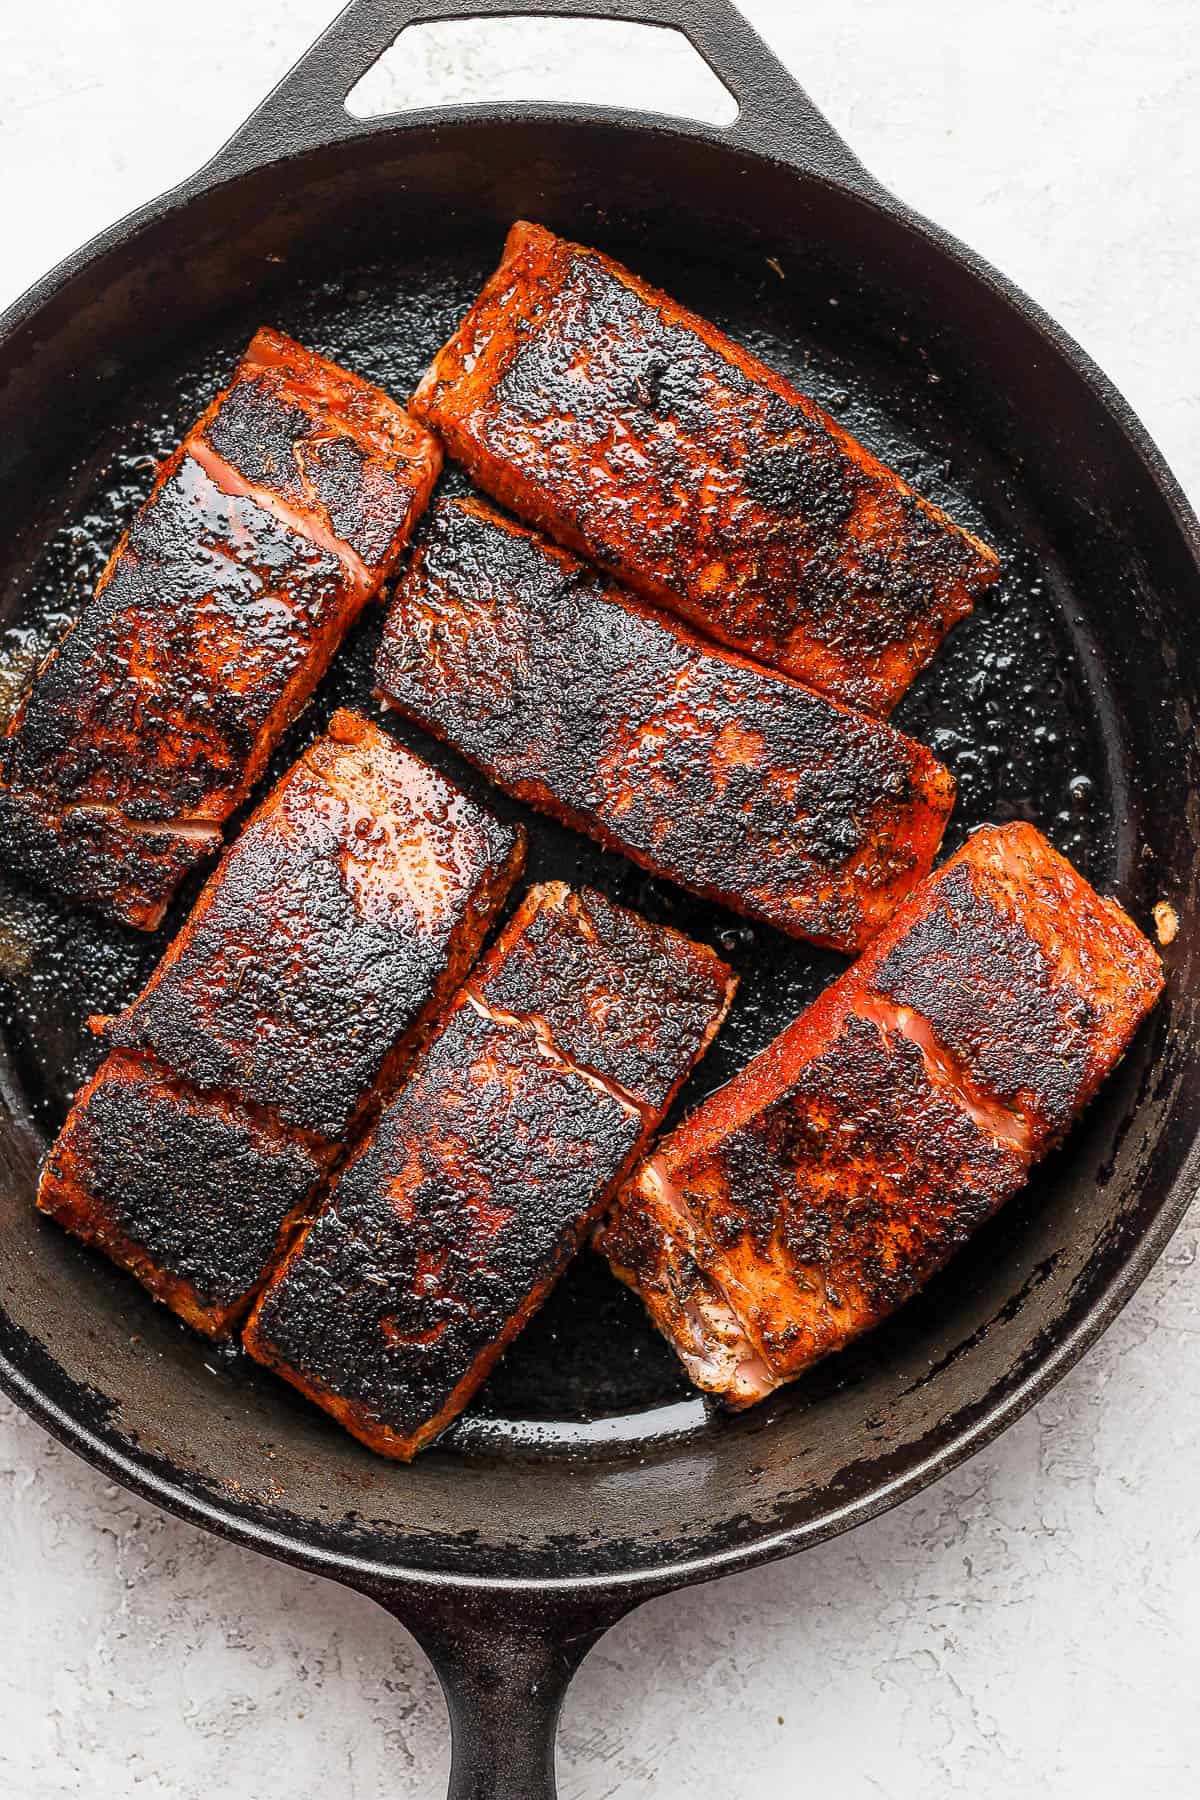 Blackened salmon fillets in a cast iron skillet.